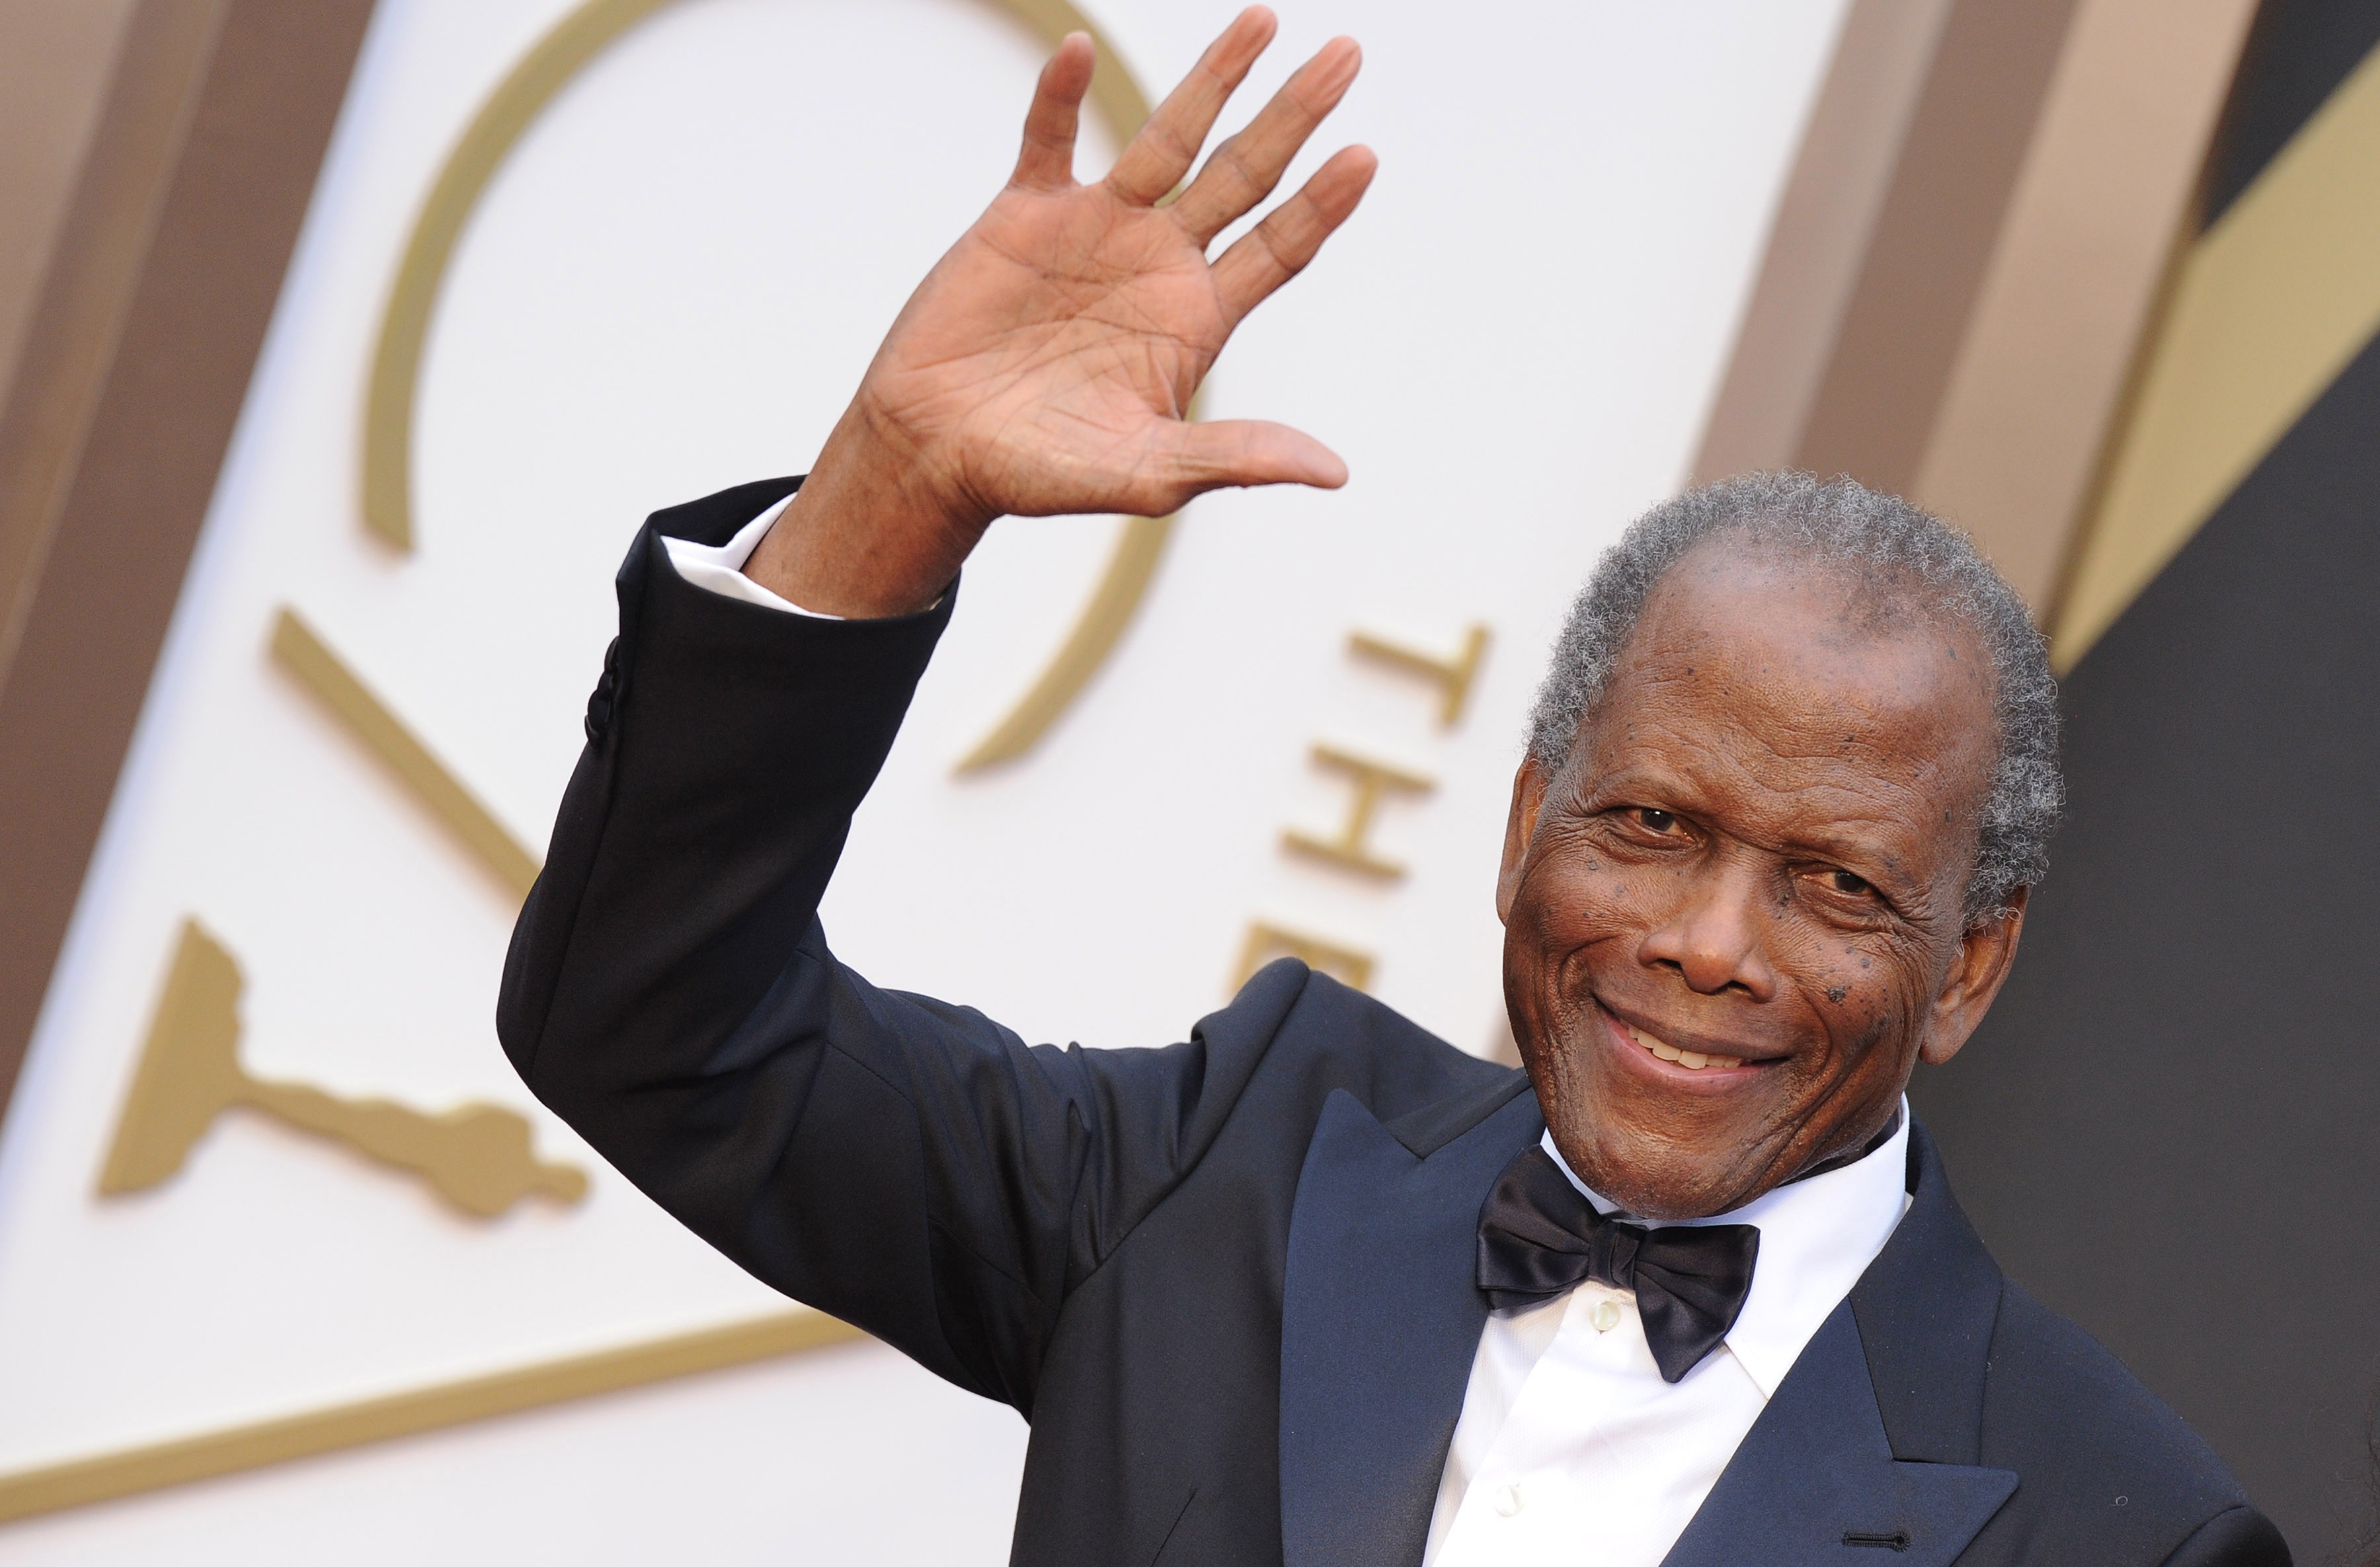 HOLLYWOOD, CA - MARCH 02:  Actor Sidney Poitier arrives at the 86th Annual Academy Awards at Hollywood & Highland Center on March 2, 2014 in Hollywood, California.  (Photo by Axelle/Bauer-Griffin/FilmMagic) (Foto: FilmMagic)